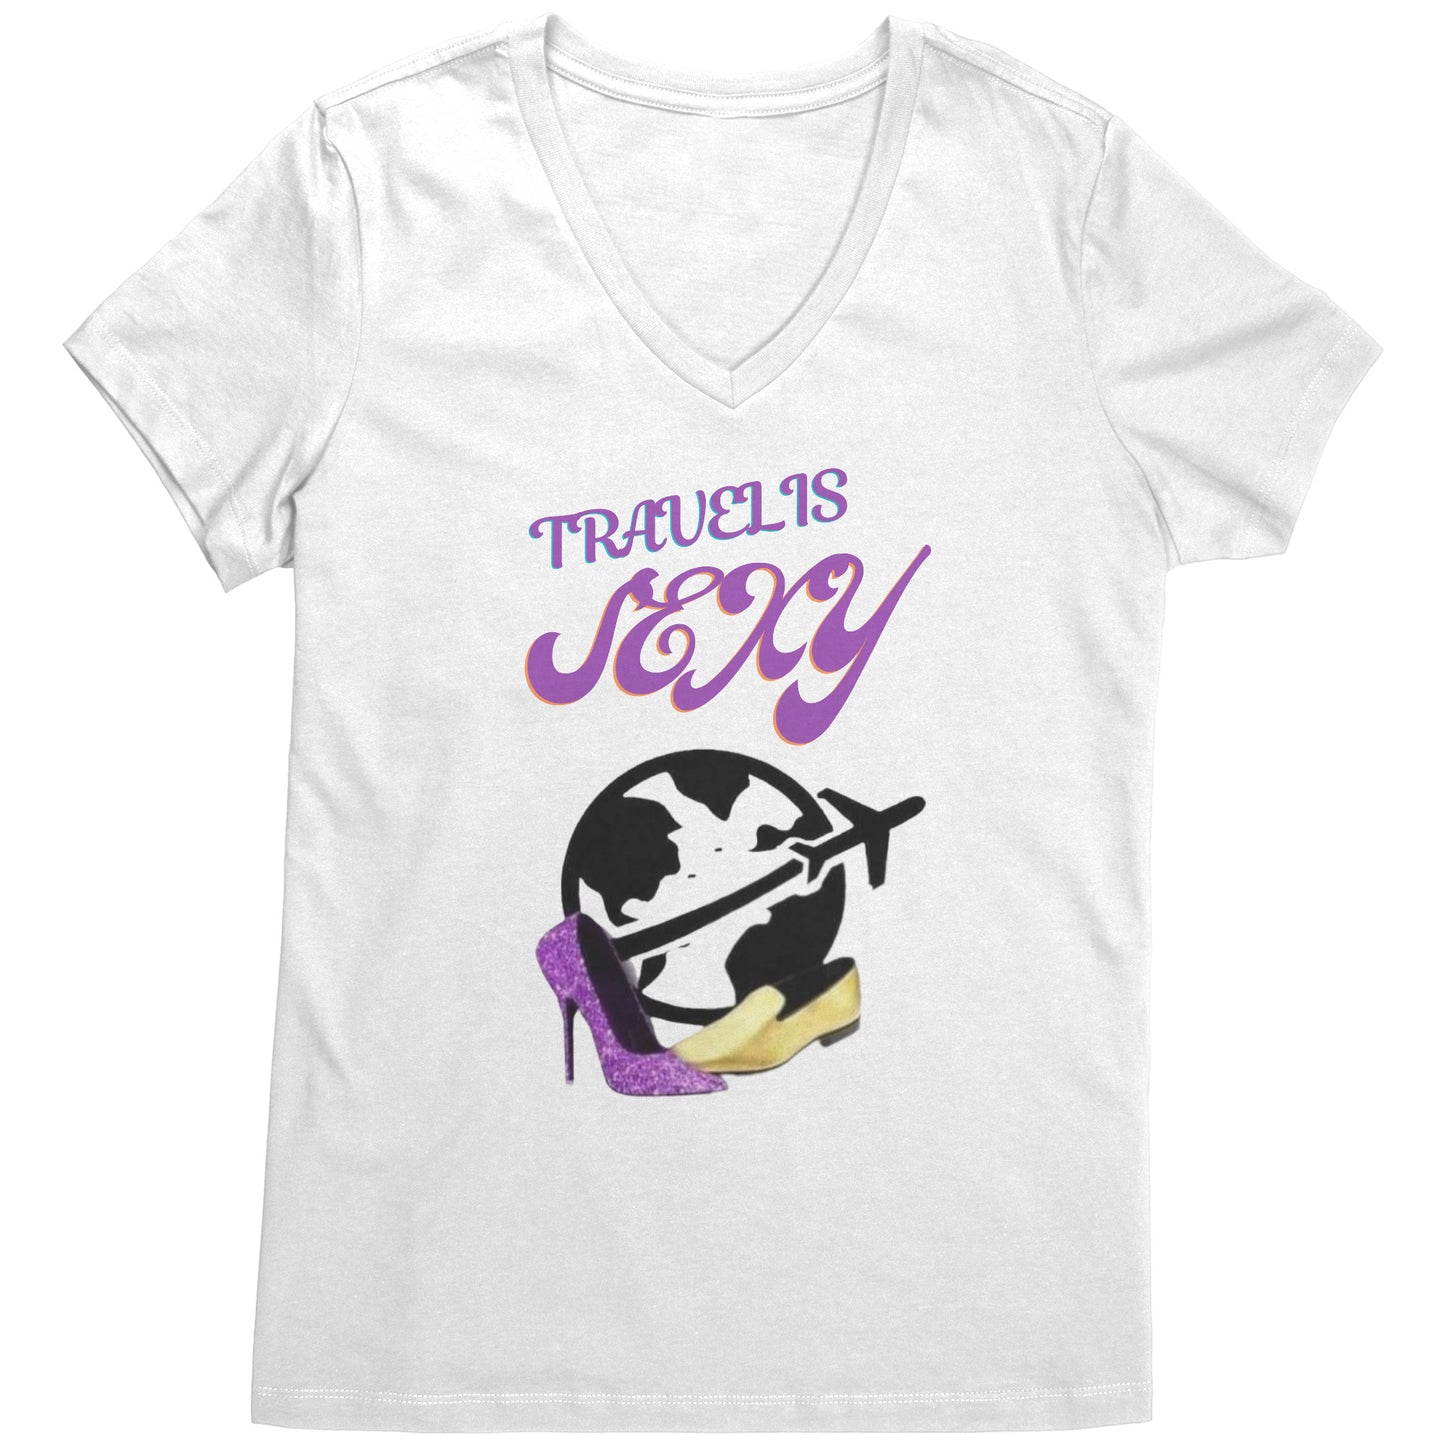 Travel Is Sexy Woman's V-Neck Tee